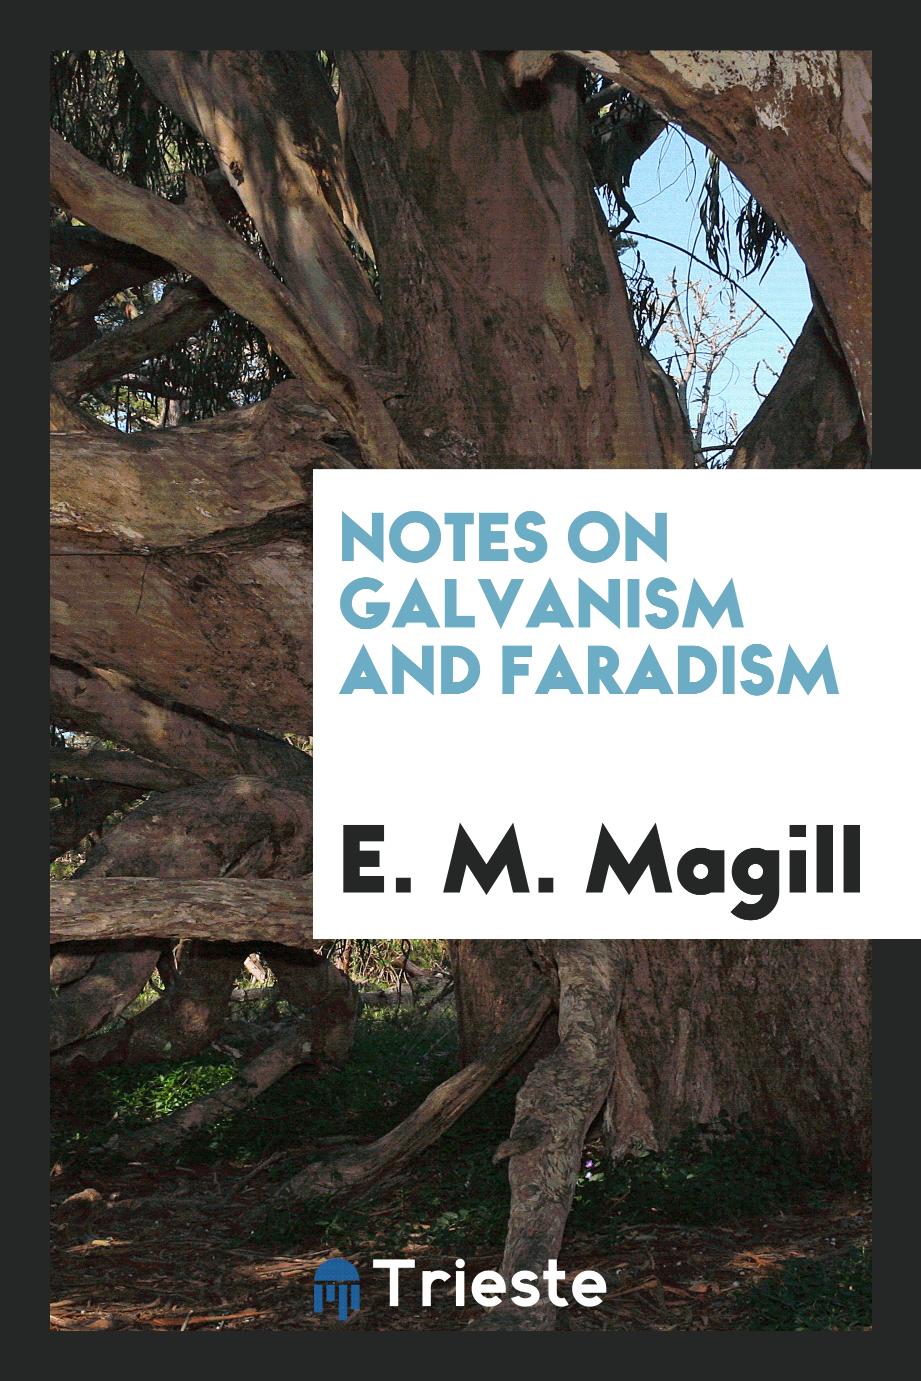 Notes on galvanism and faradism